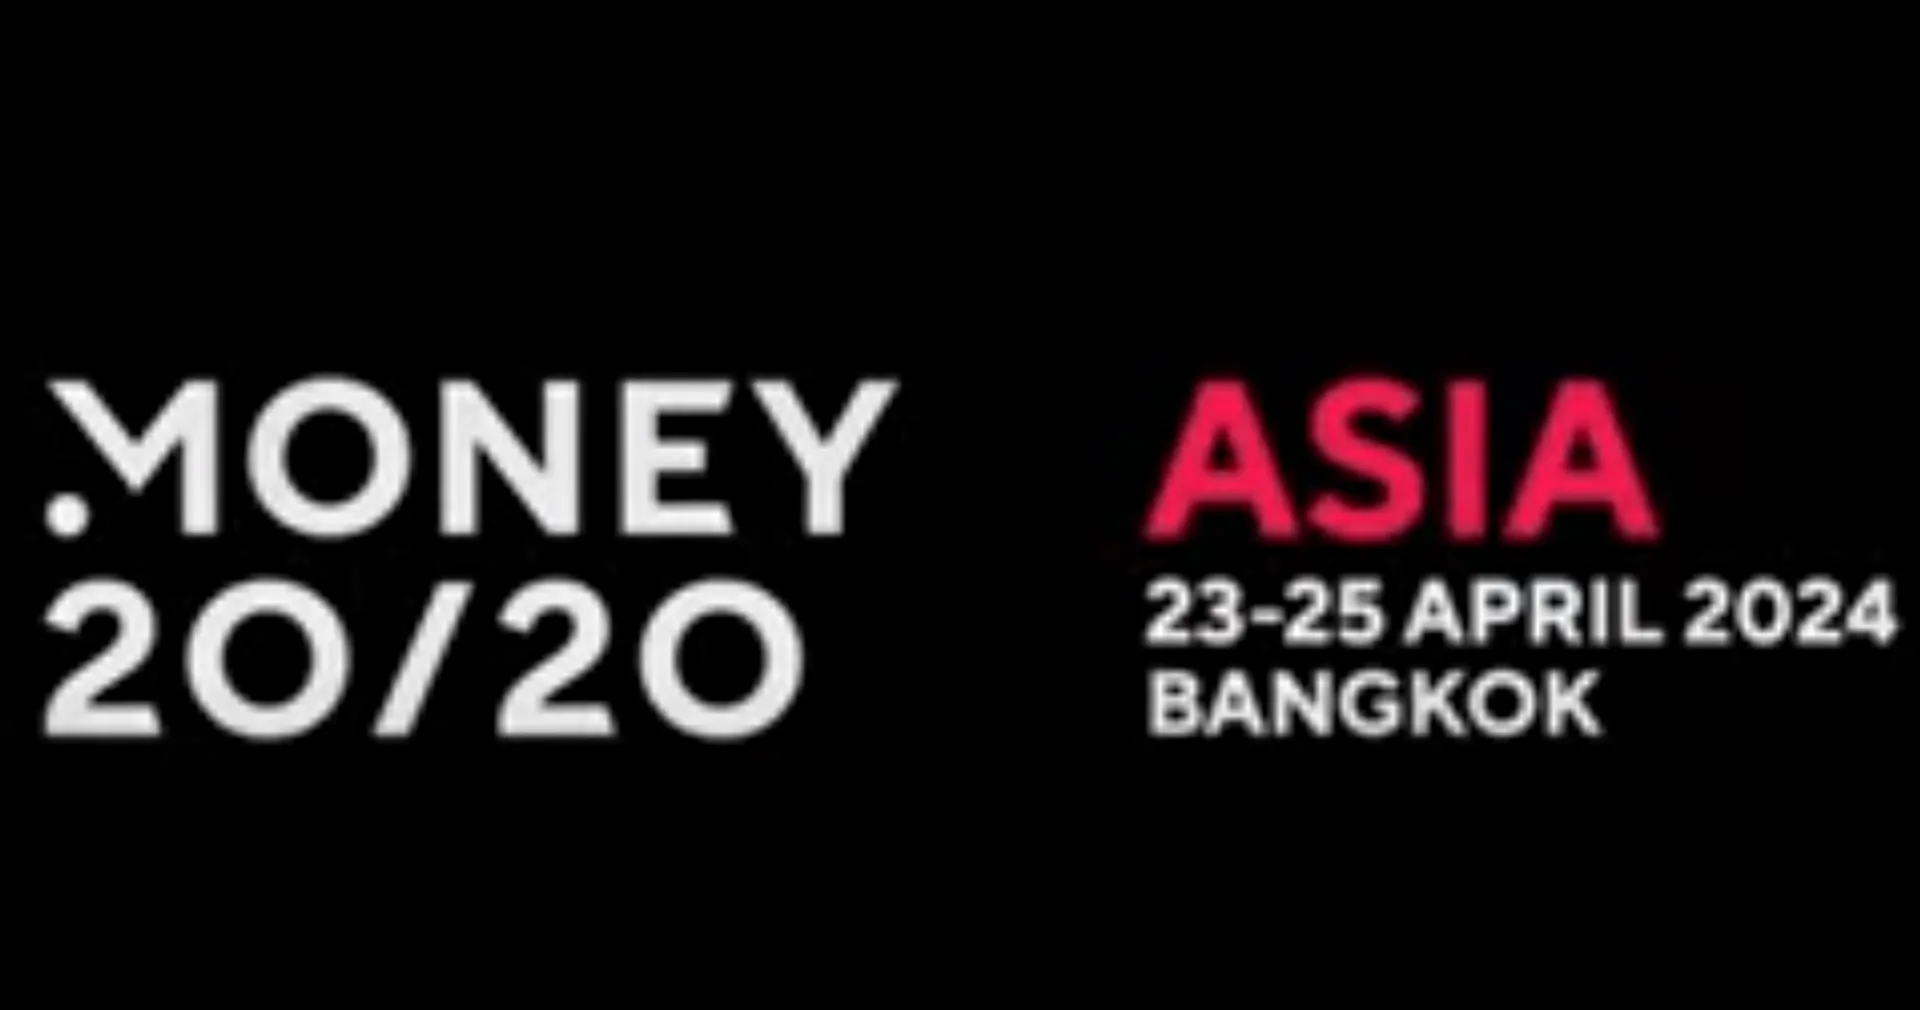 MONEY 2020 ASIA.2-4w4g75.png